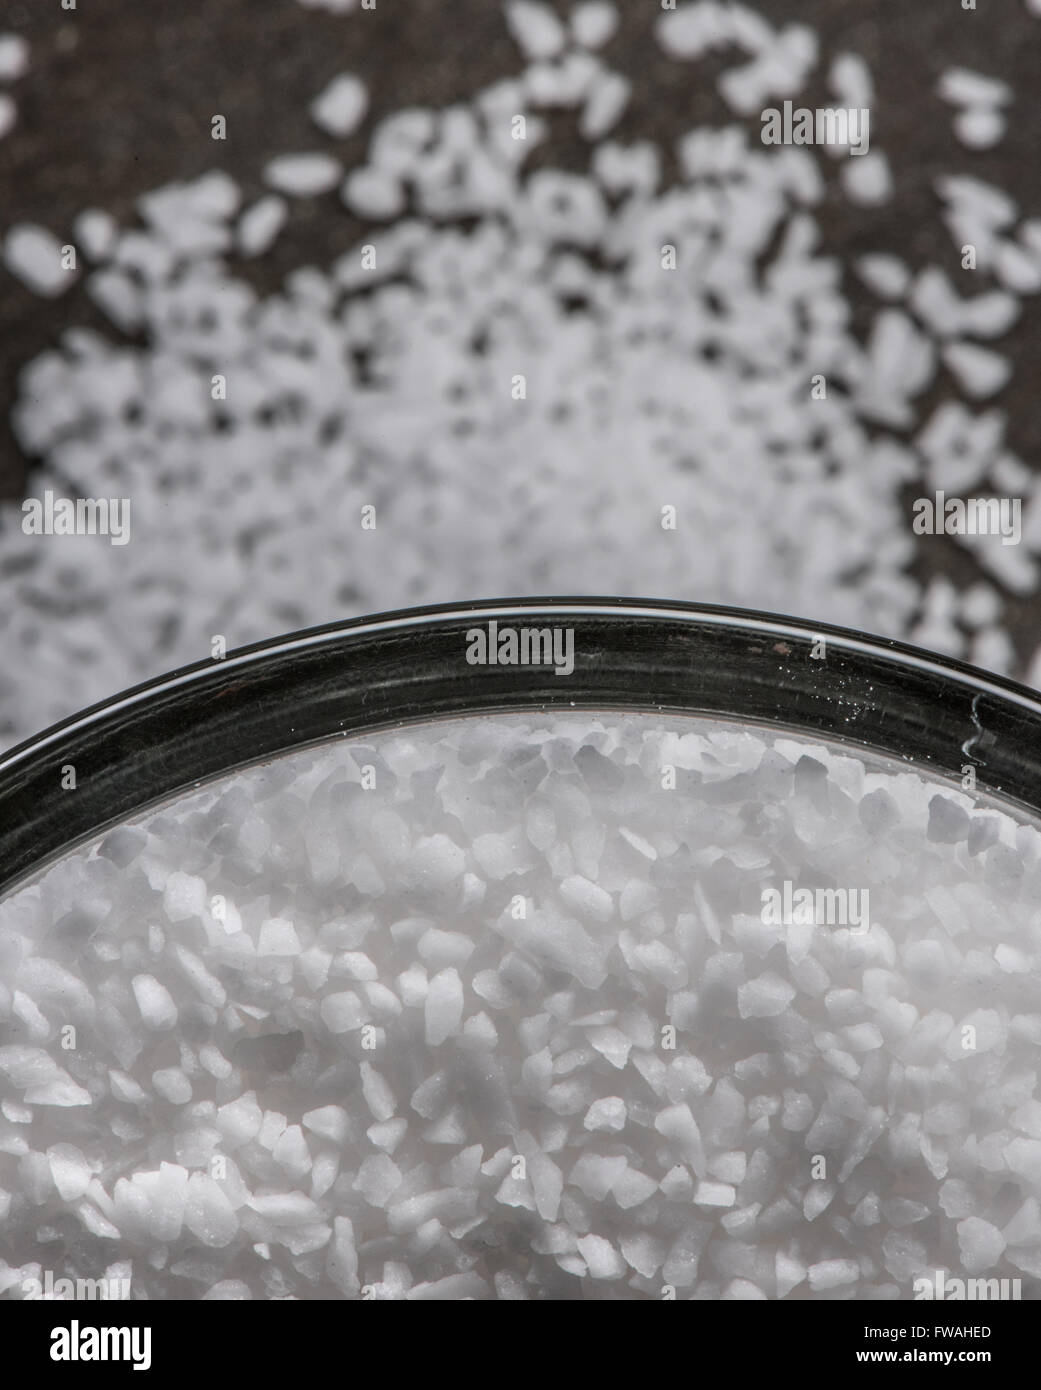 Sea salt in glass bowl with spill over onto slate cutting board background Stock Photo